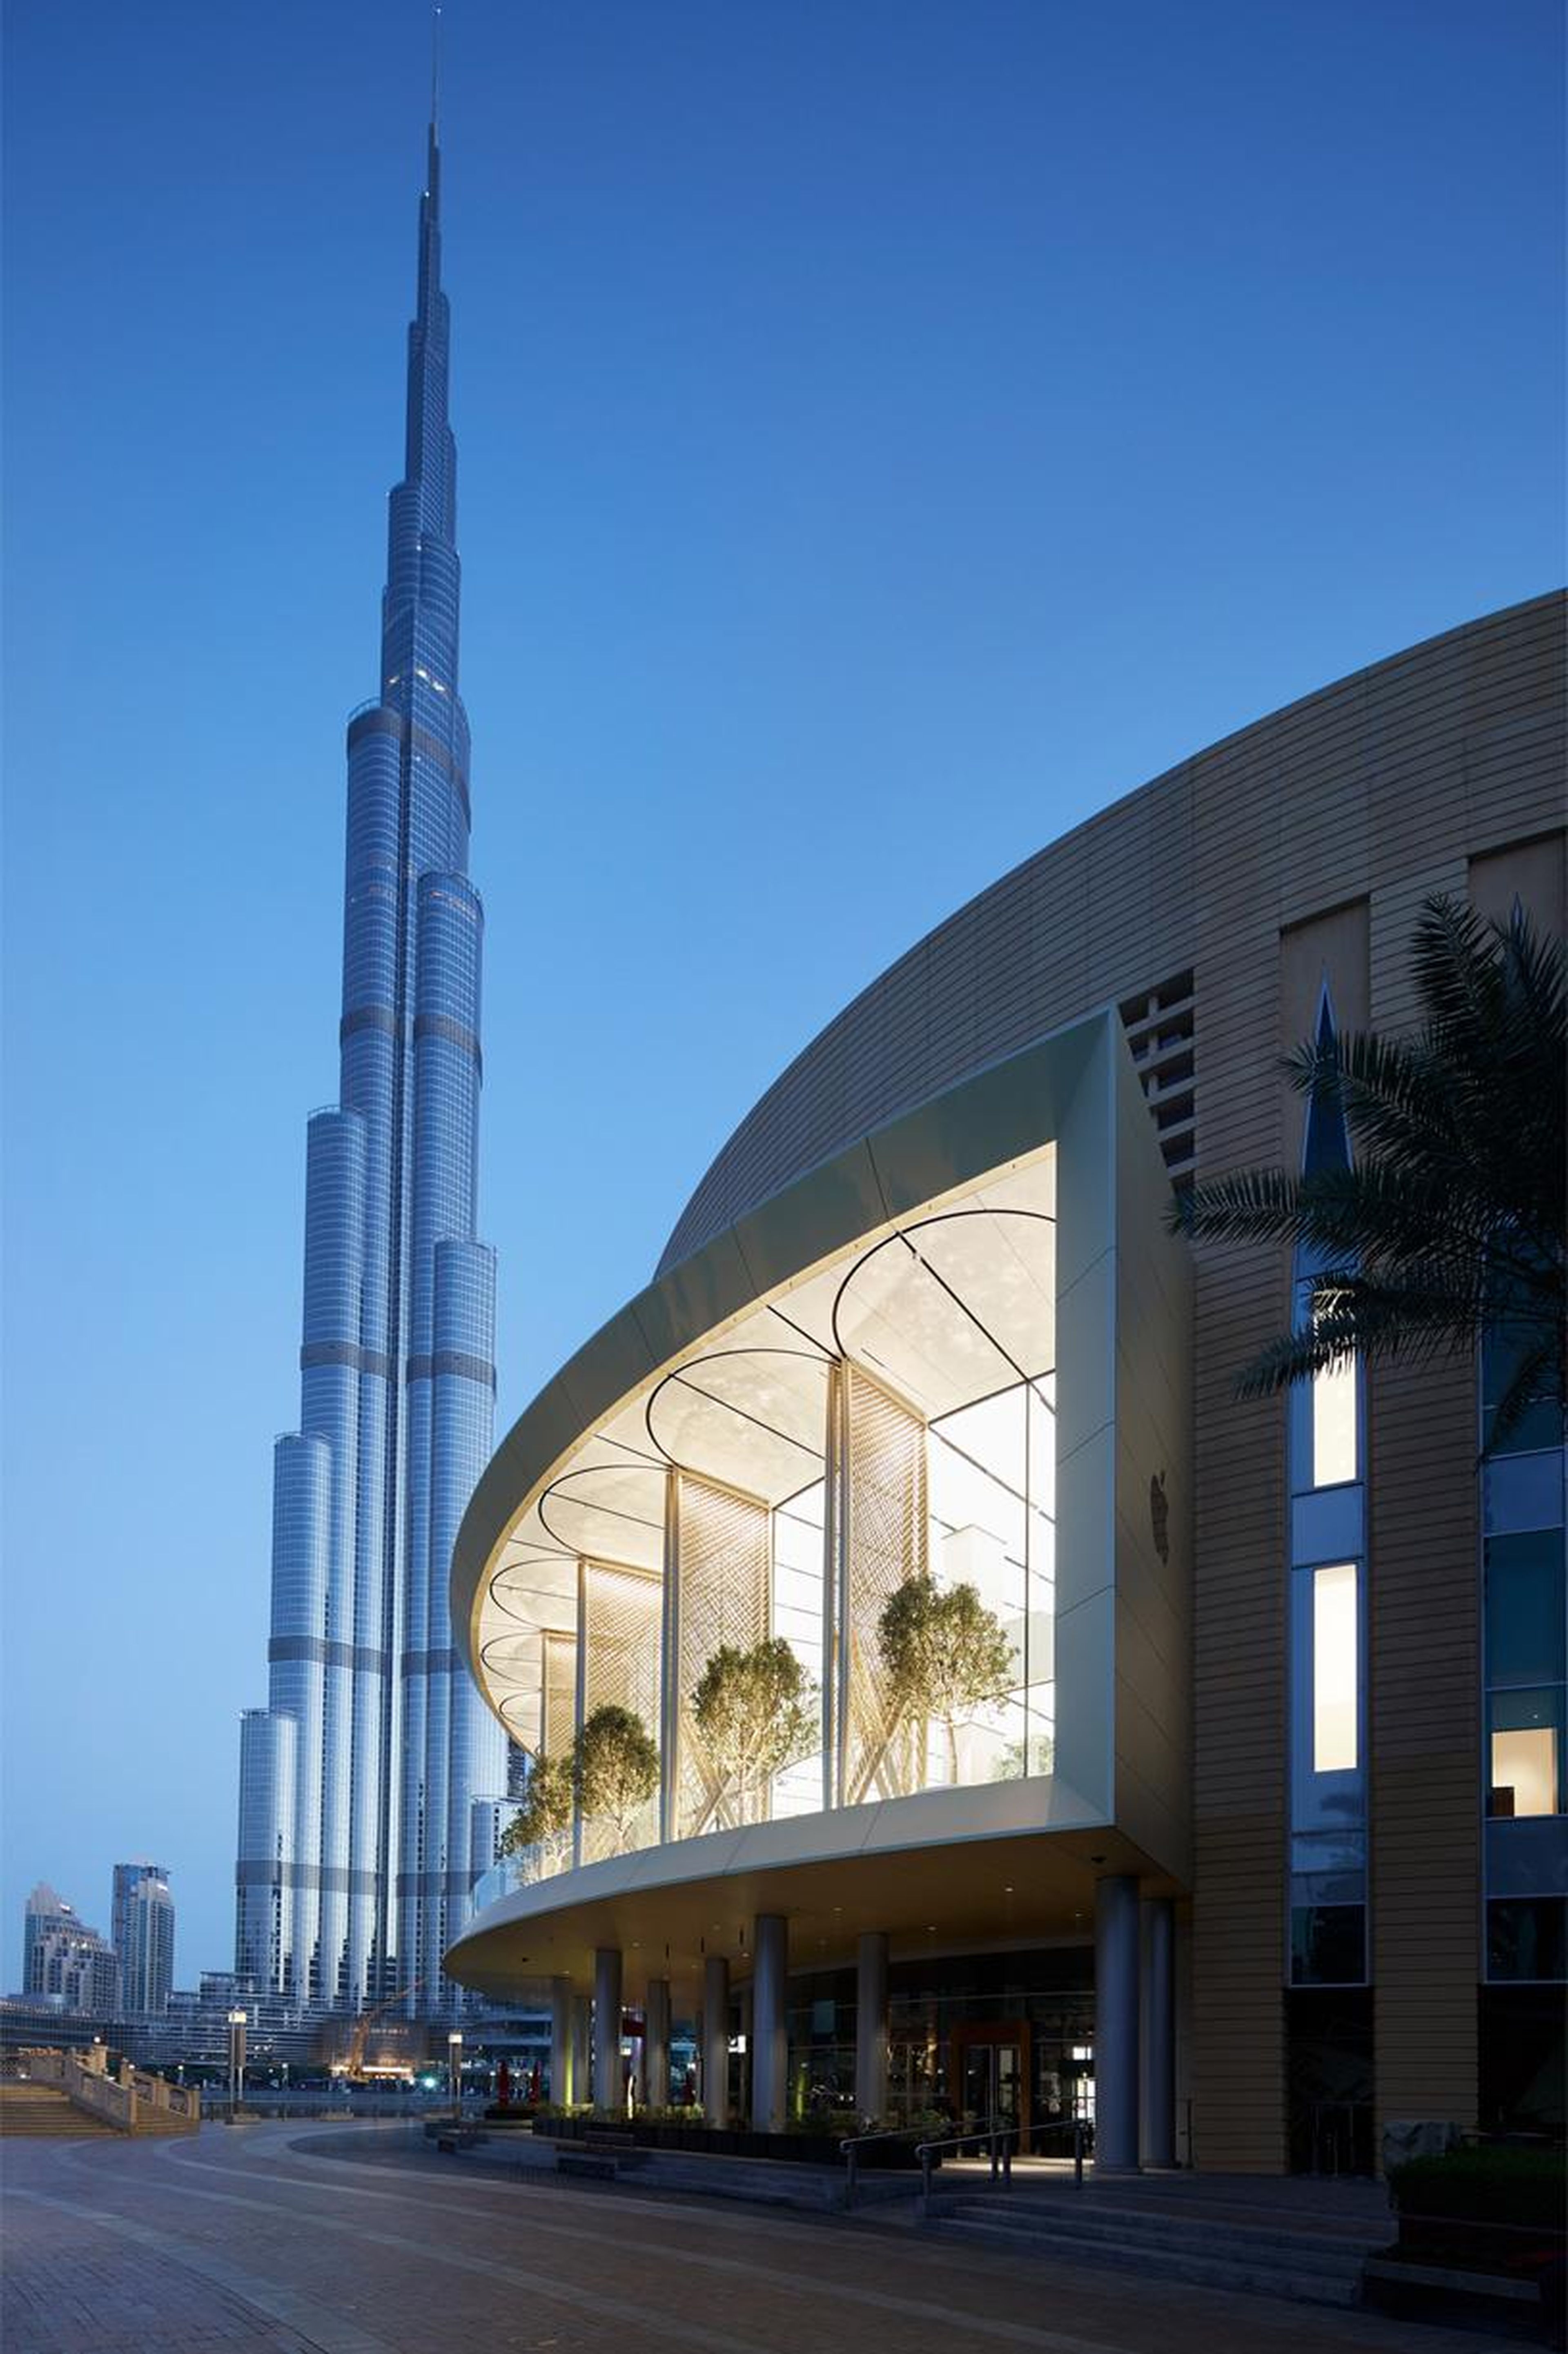 Steps away from the world's tallest building, the Burj Khalifa, is one of Apple's two Dubai locations.